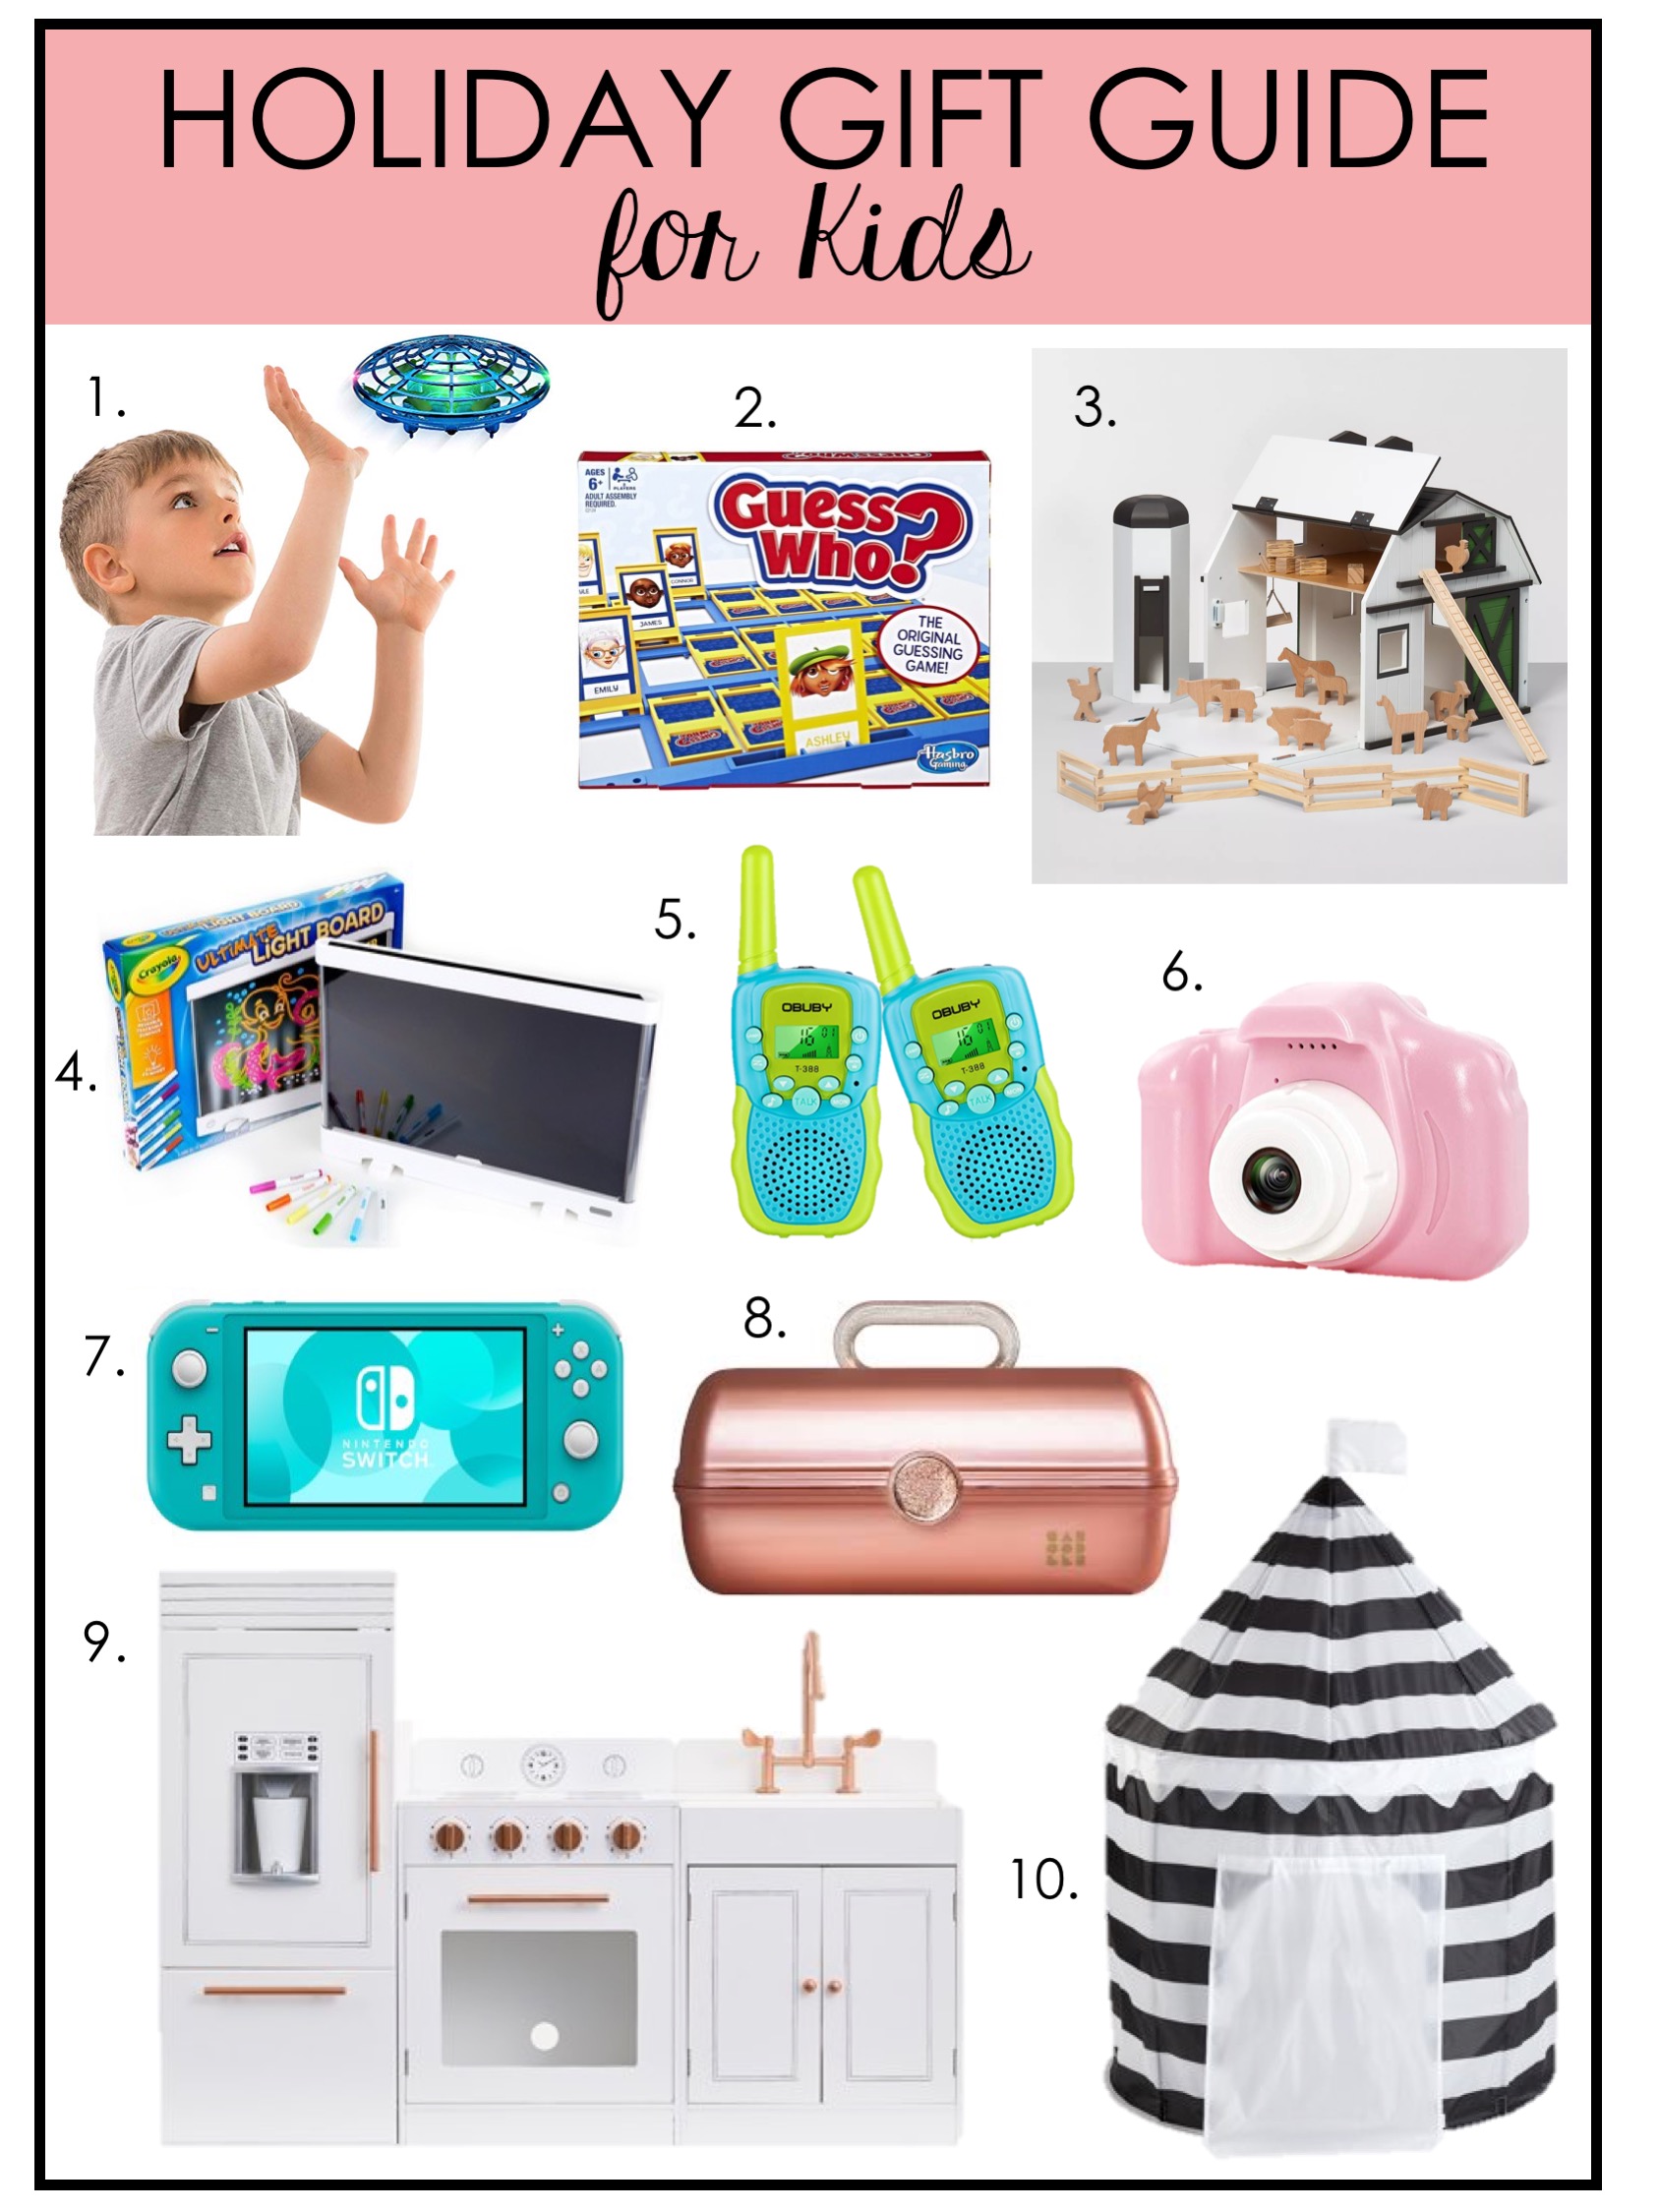 Huge Christmas gift guide for her, him and kids! – House Mix